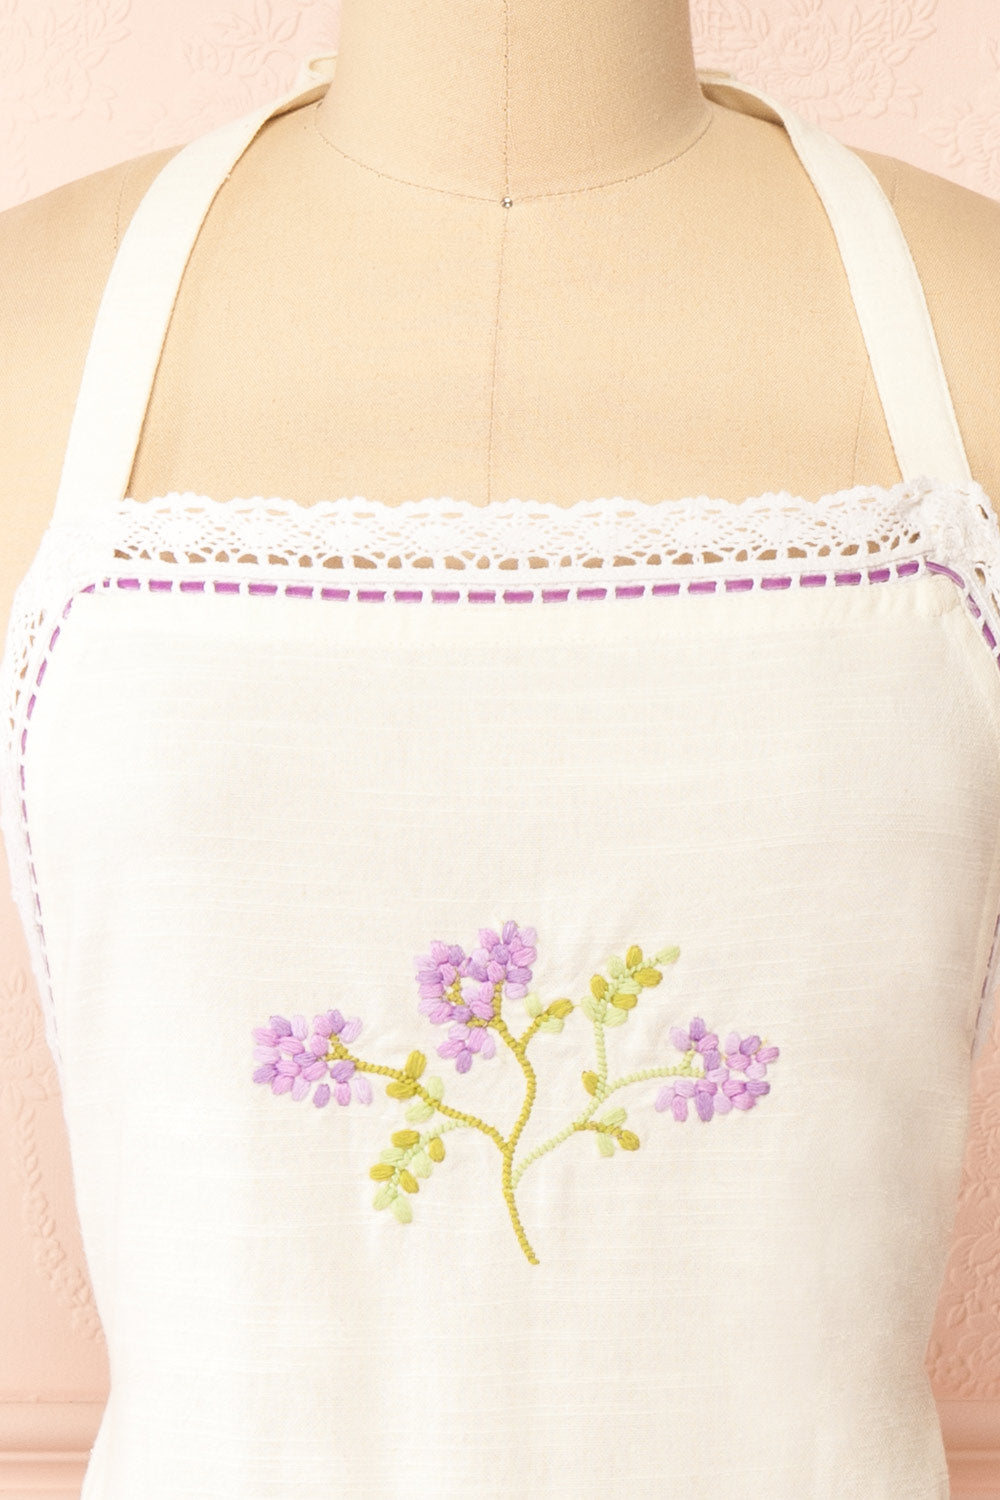 Cornwall White Apron with Embroidered Lavender | Boutique 1861 front close-up